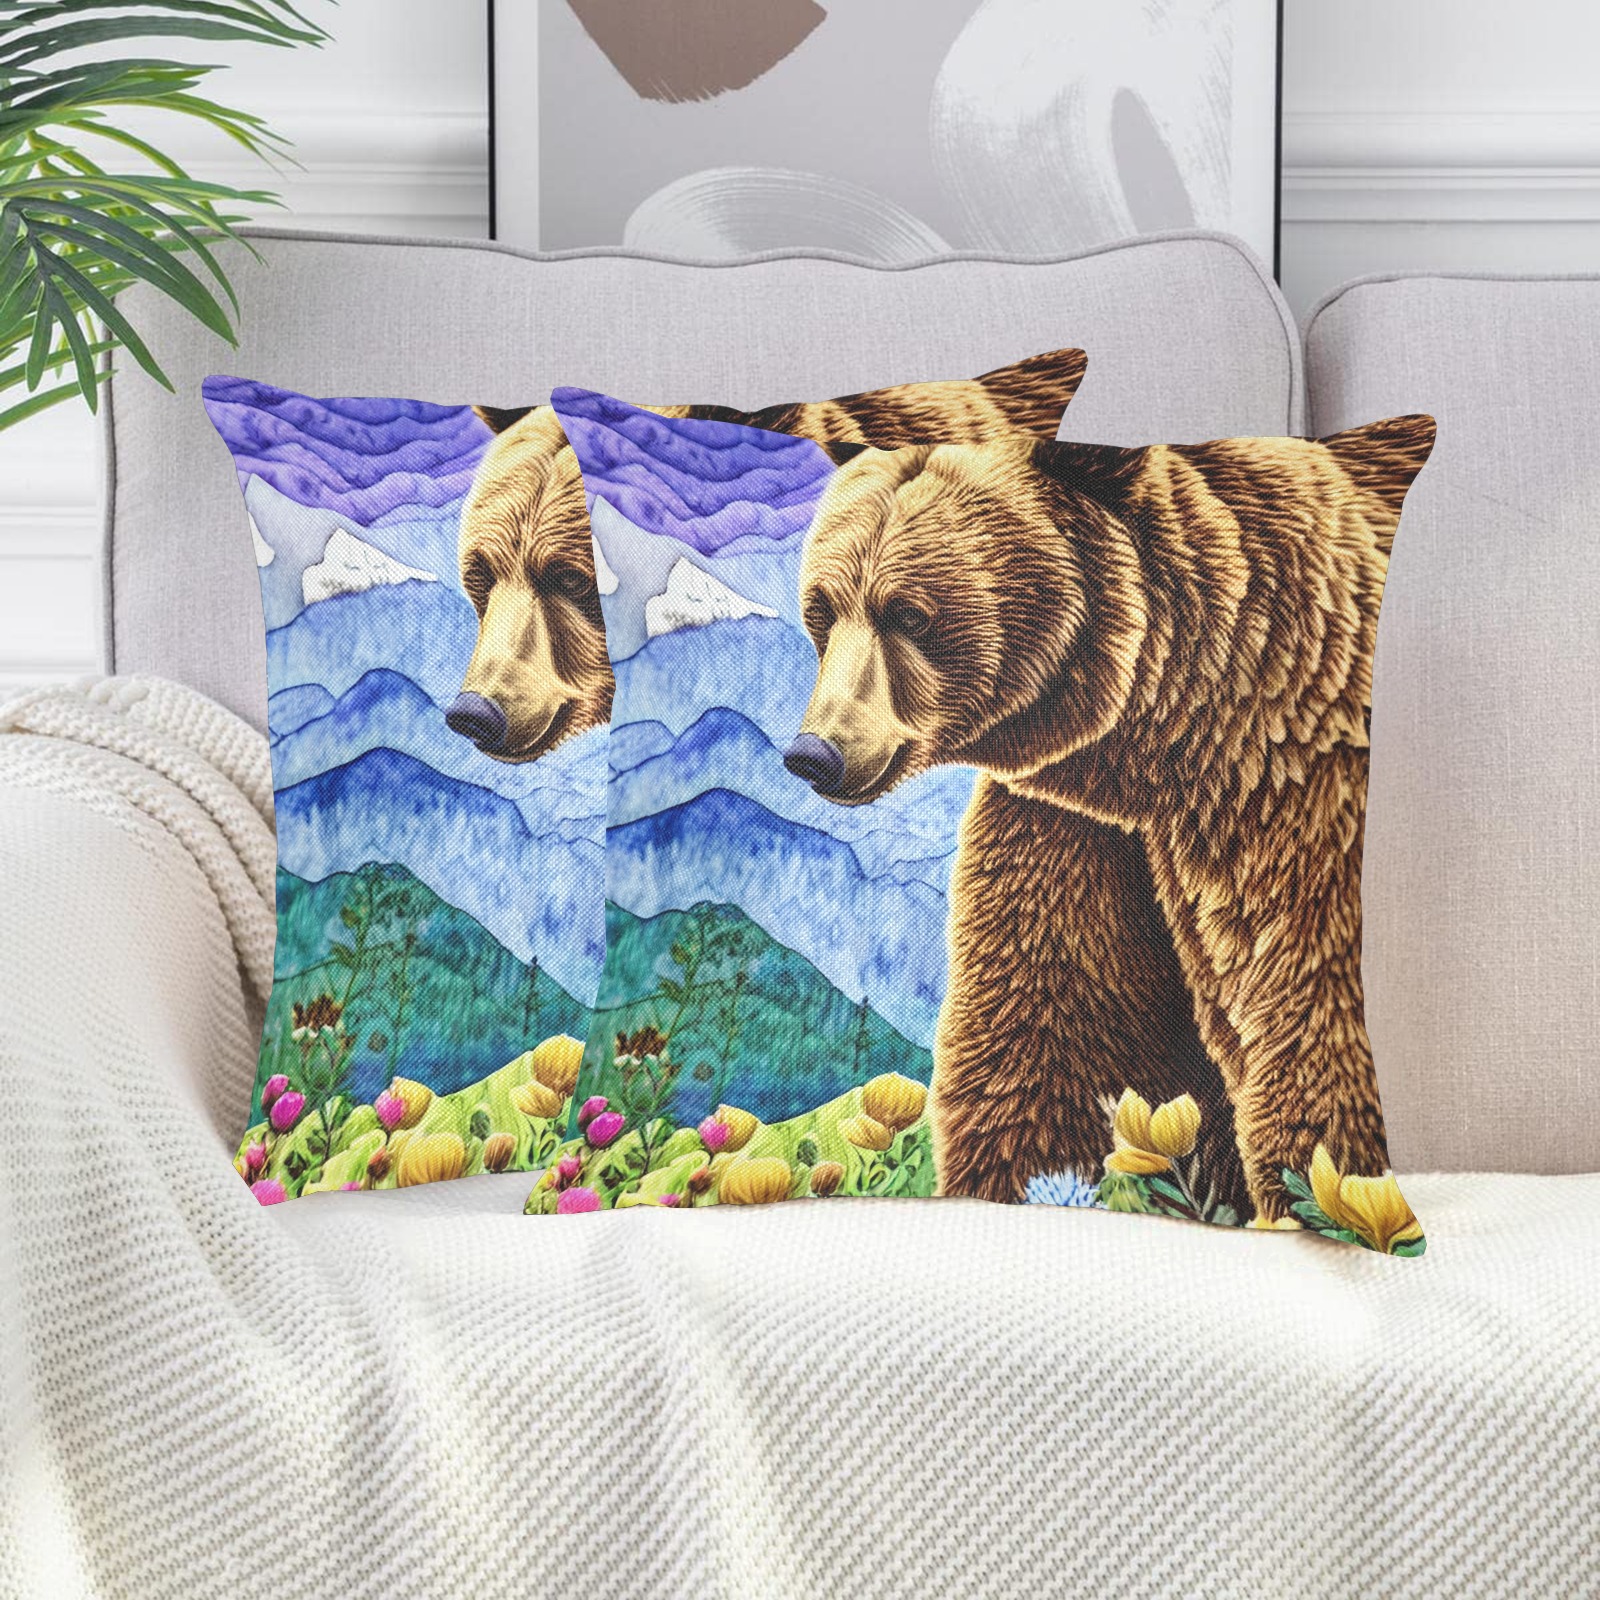 Boho Bear Simulated Quilt Artwork Linen Zippered Pillowcase 18"x18"(Two Sides&Pack of 2)